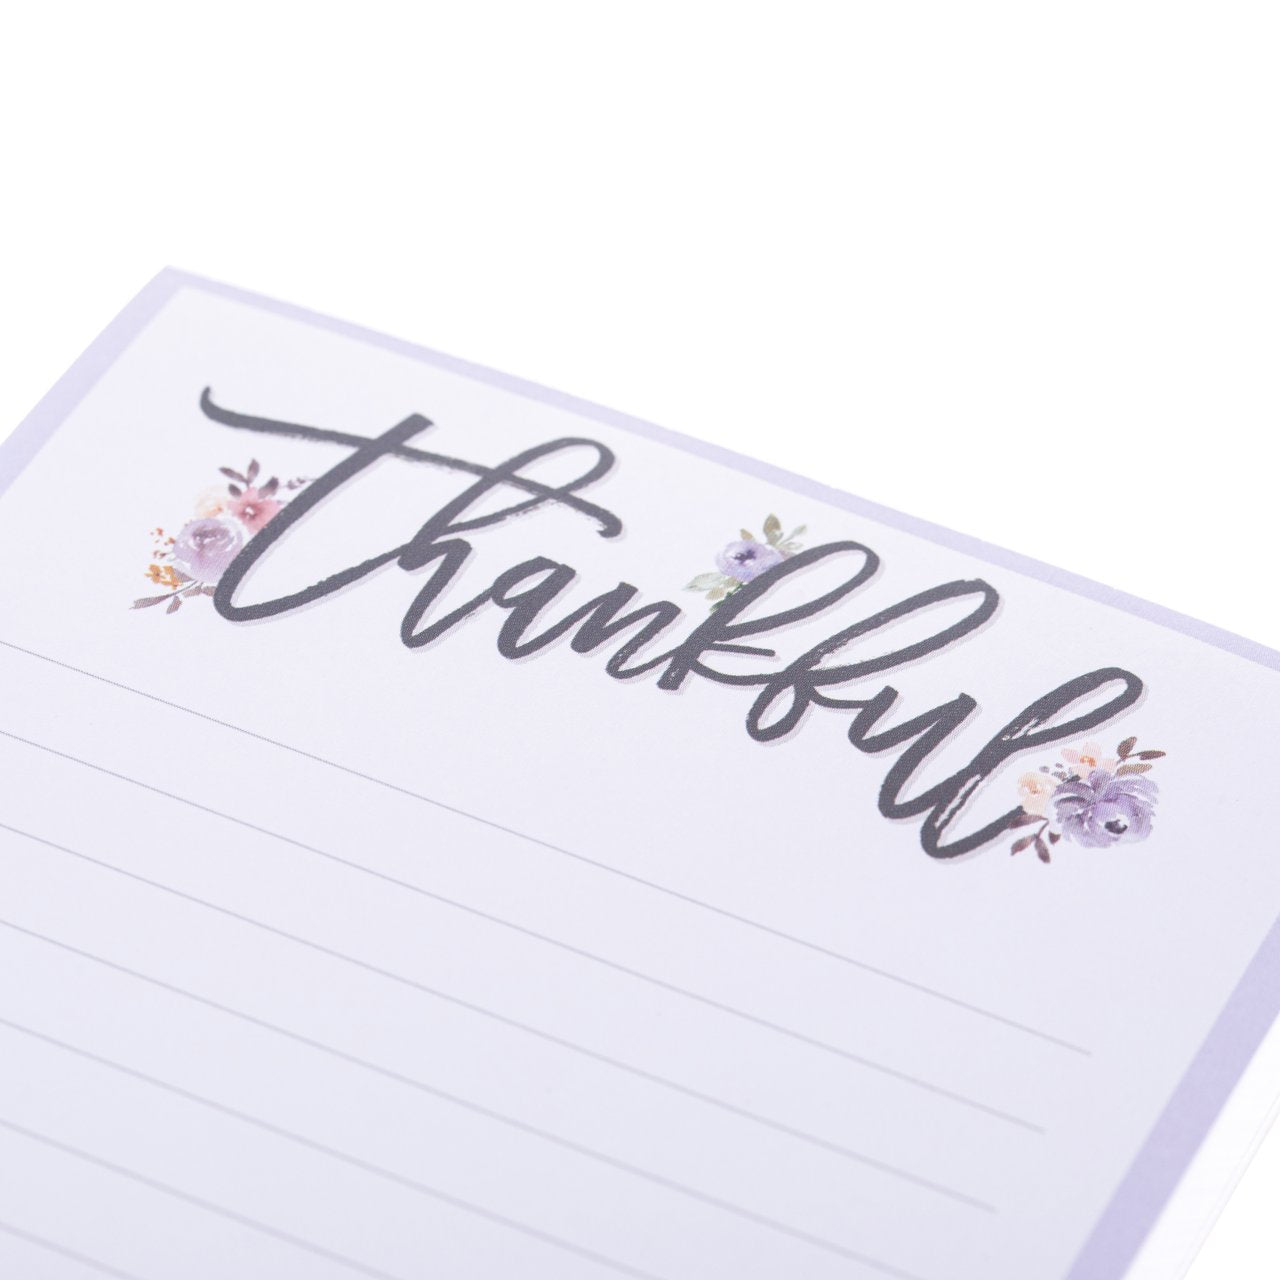 Thankful - Magnetic Notepad    